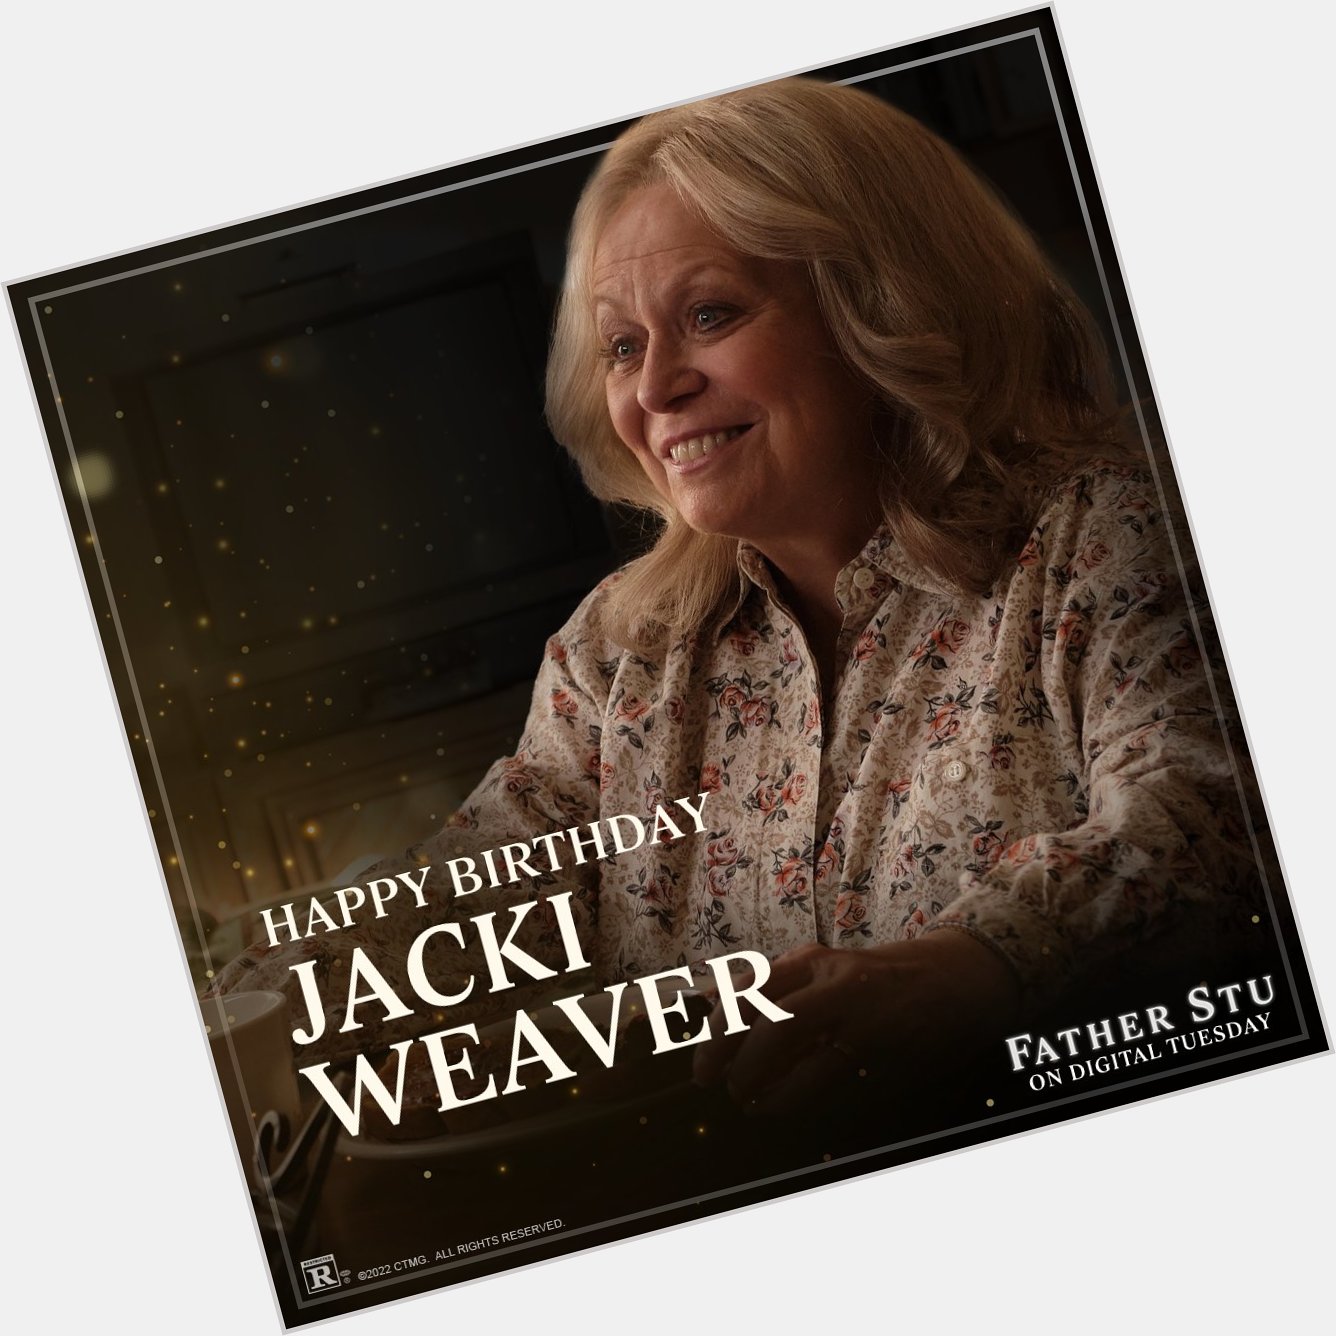 Happy birthday, Jacki Weaver! We re blessed to have you in our family. 